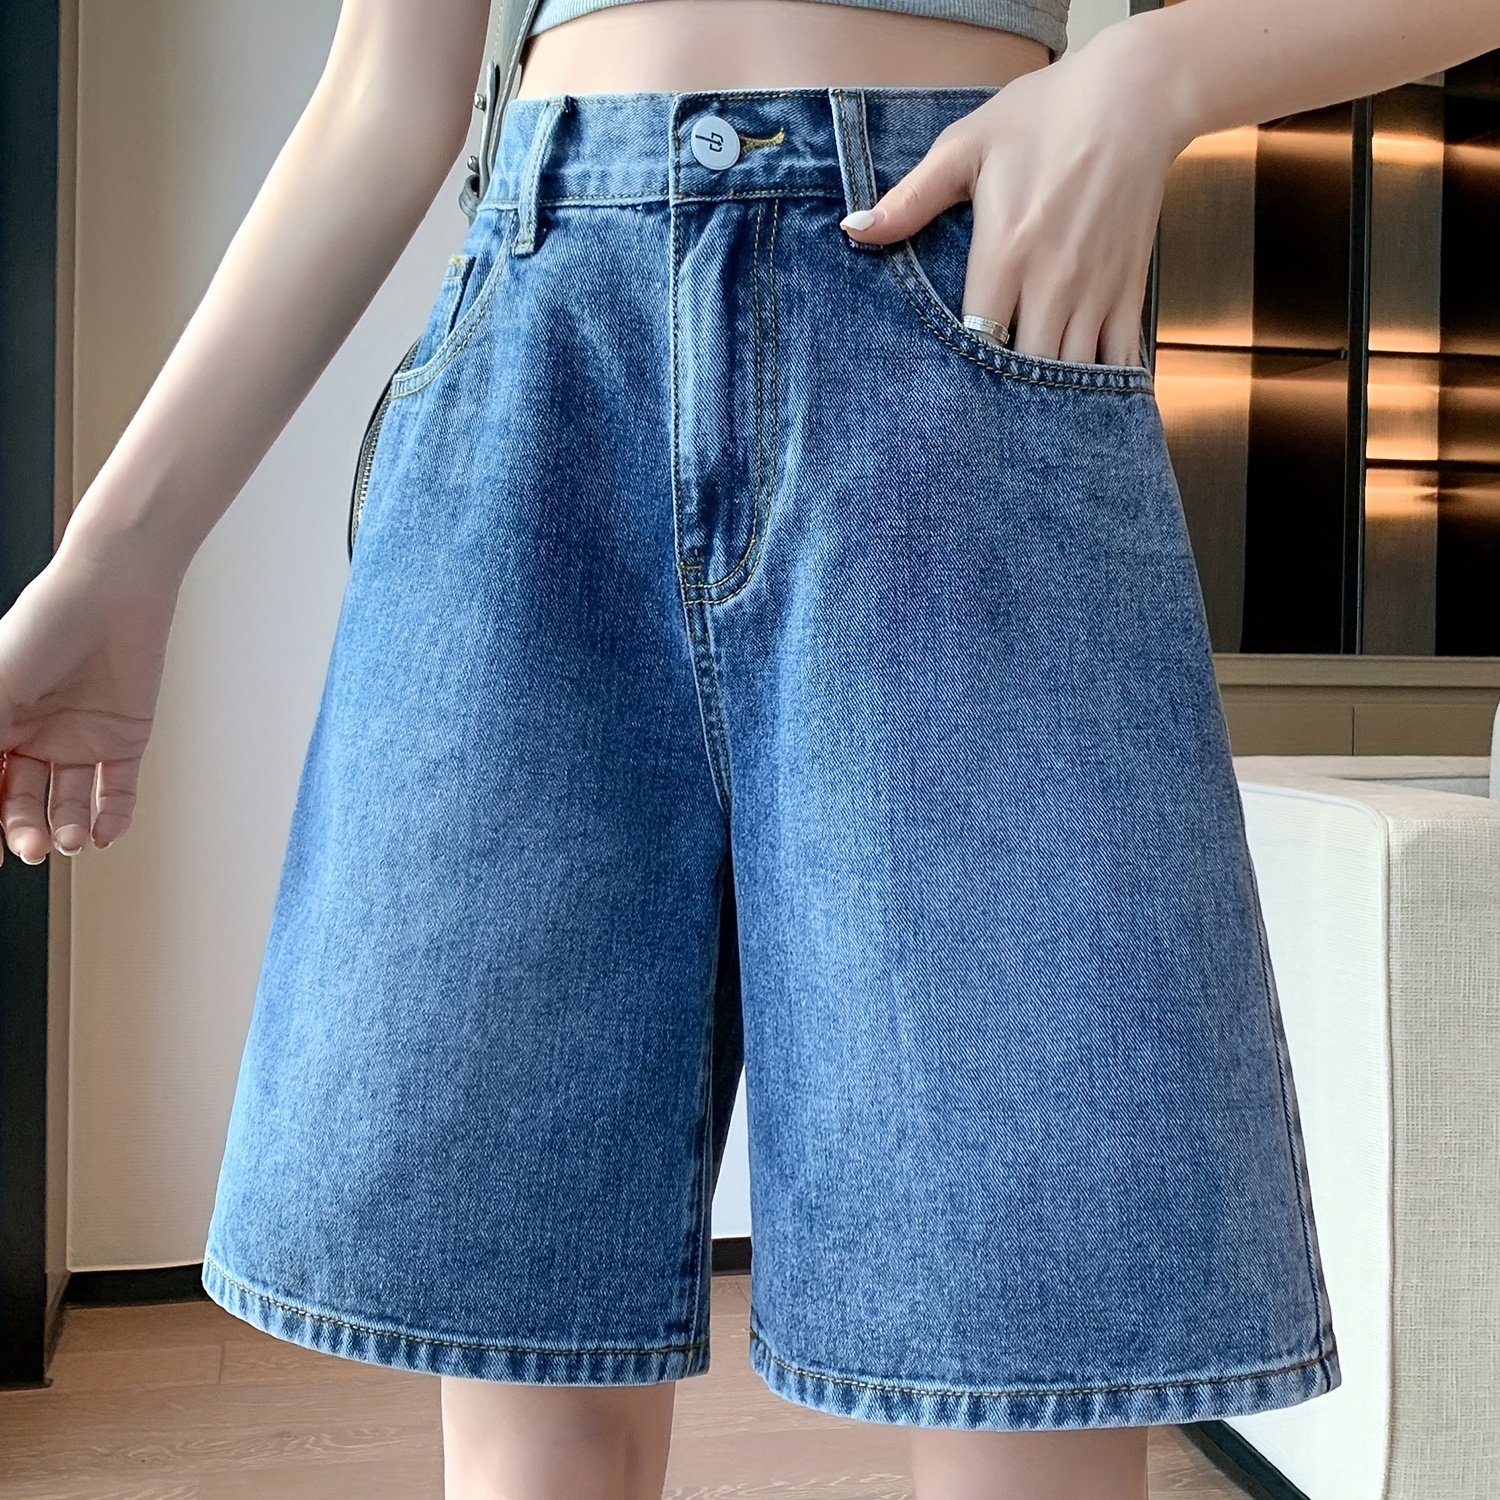 

Women's Plus Size High Waisted Denim Shorts For Summer With Pockets, Elastic Waist Loose Straight Jean Shorts For Women, Casual Light Blue Color Comfy Denim Bottoms, Women's Clothing